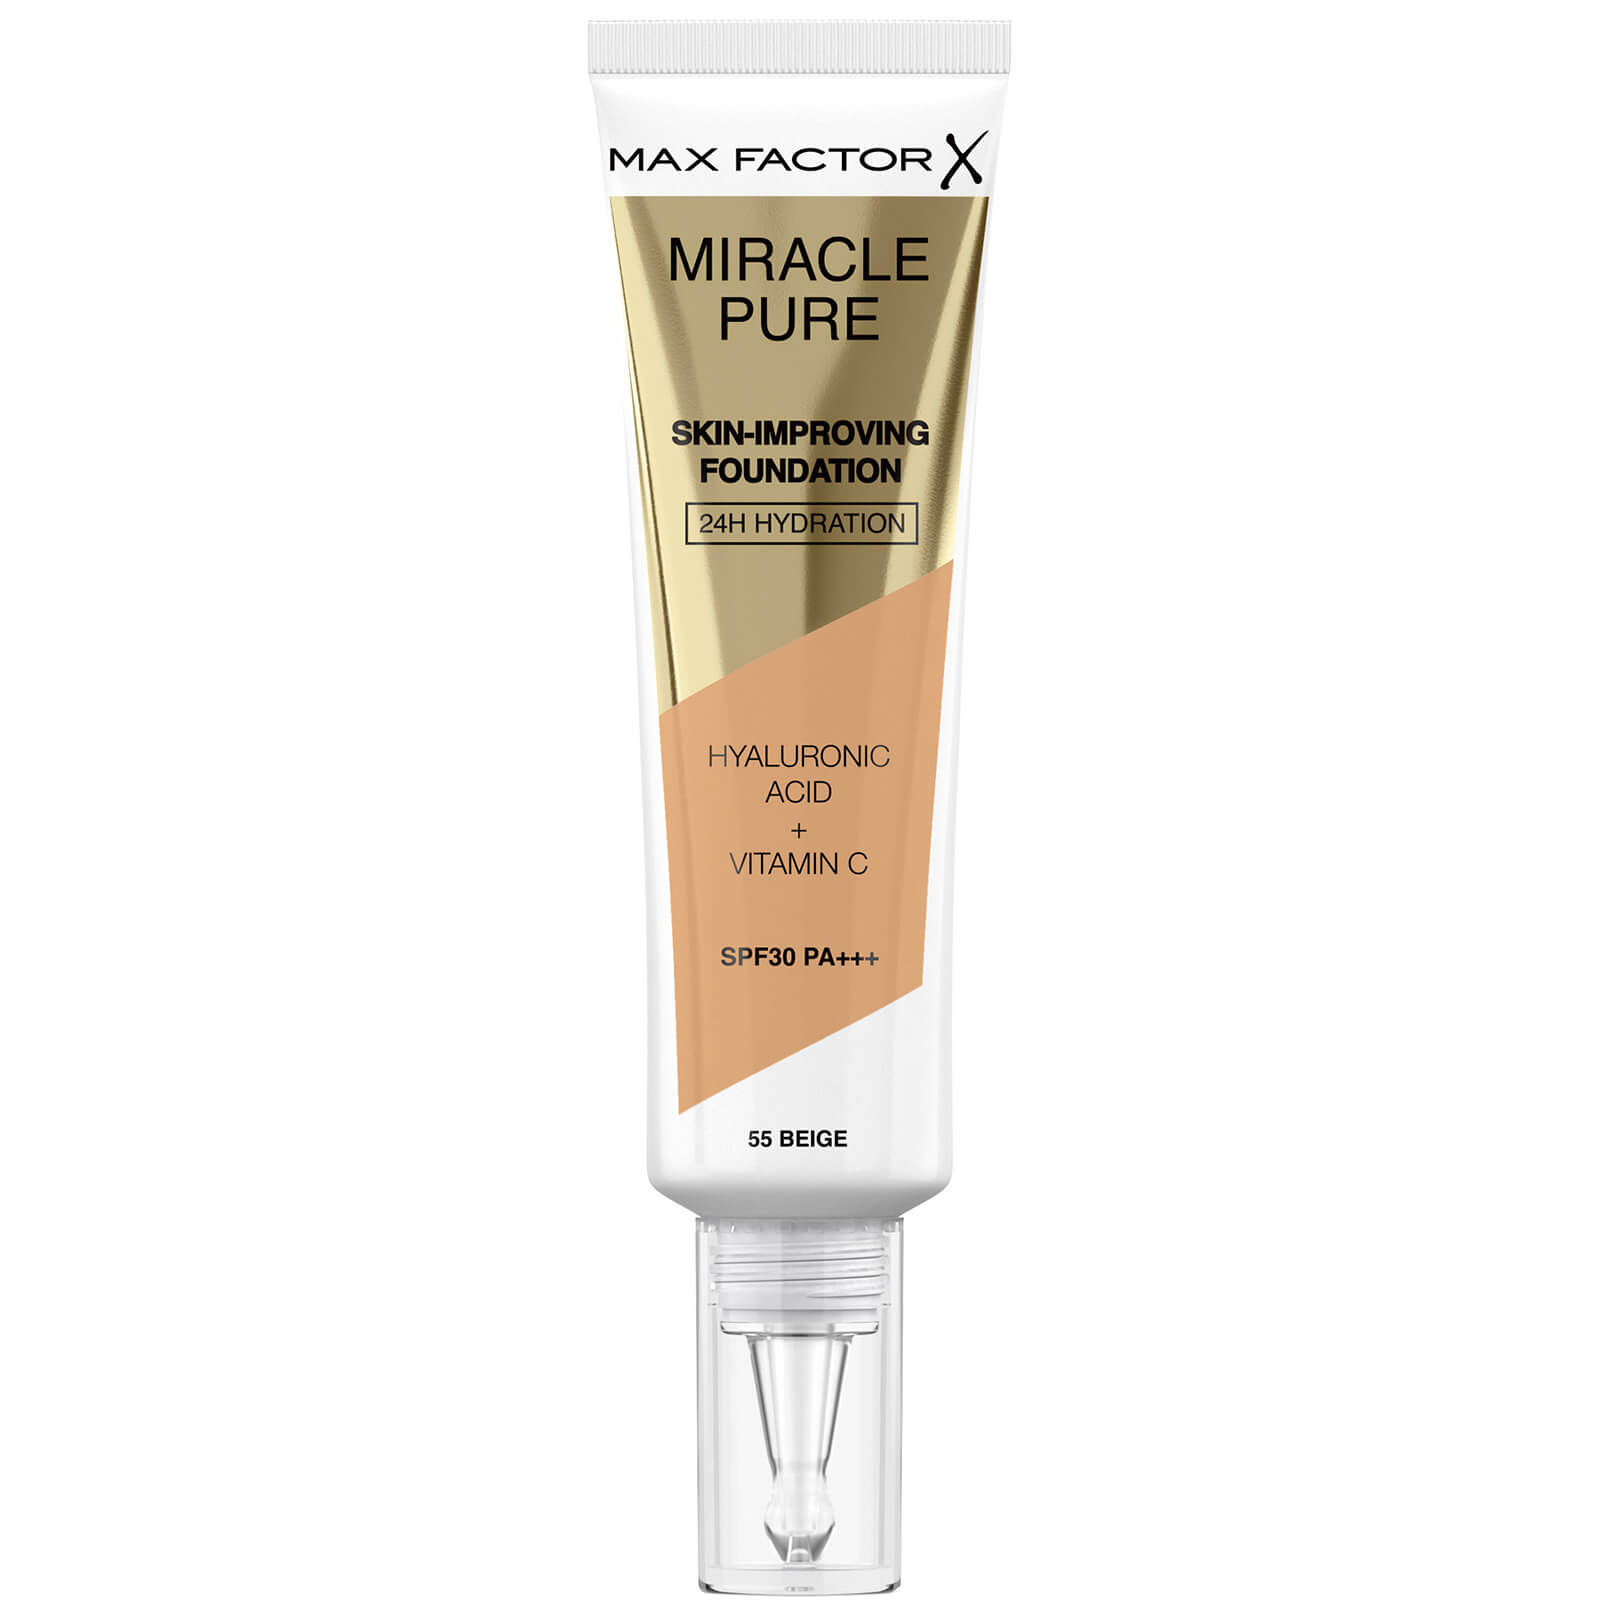 Max Factor Miracle Pure Skin Improving Foundation 30ml (Various Shades) - Beige